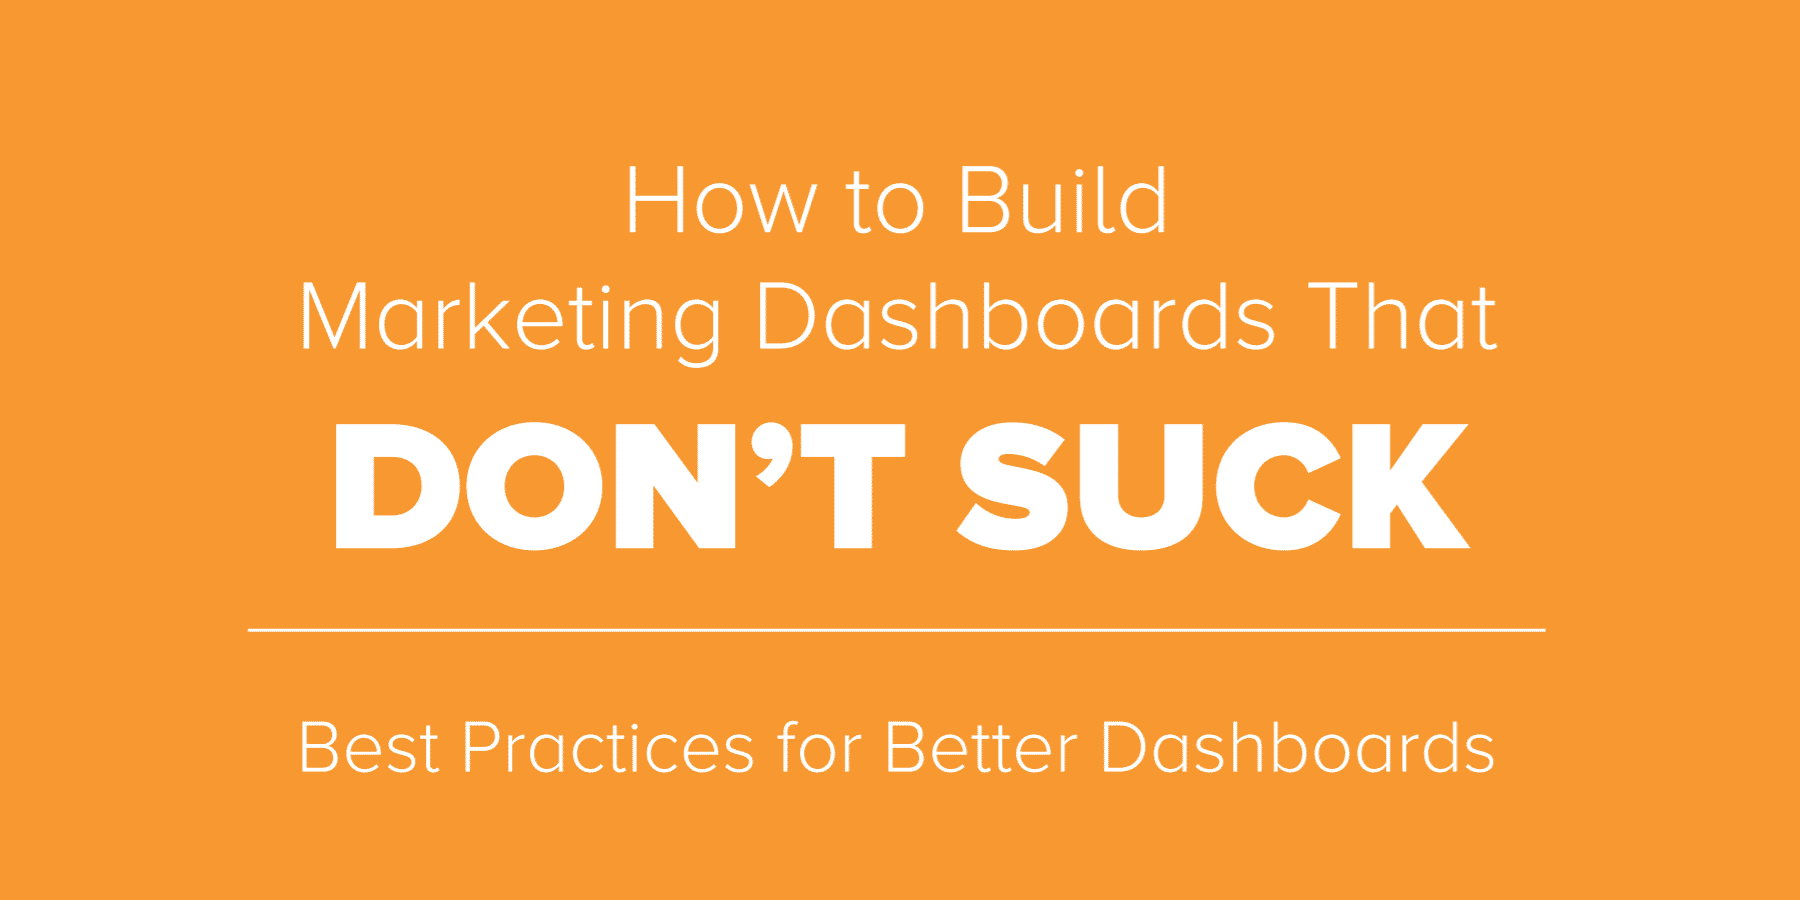 Featured image for “How to Build Dashboards That Don’t Suck”